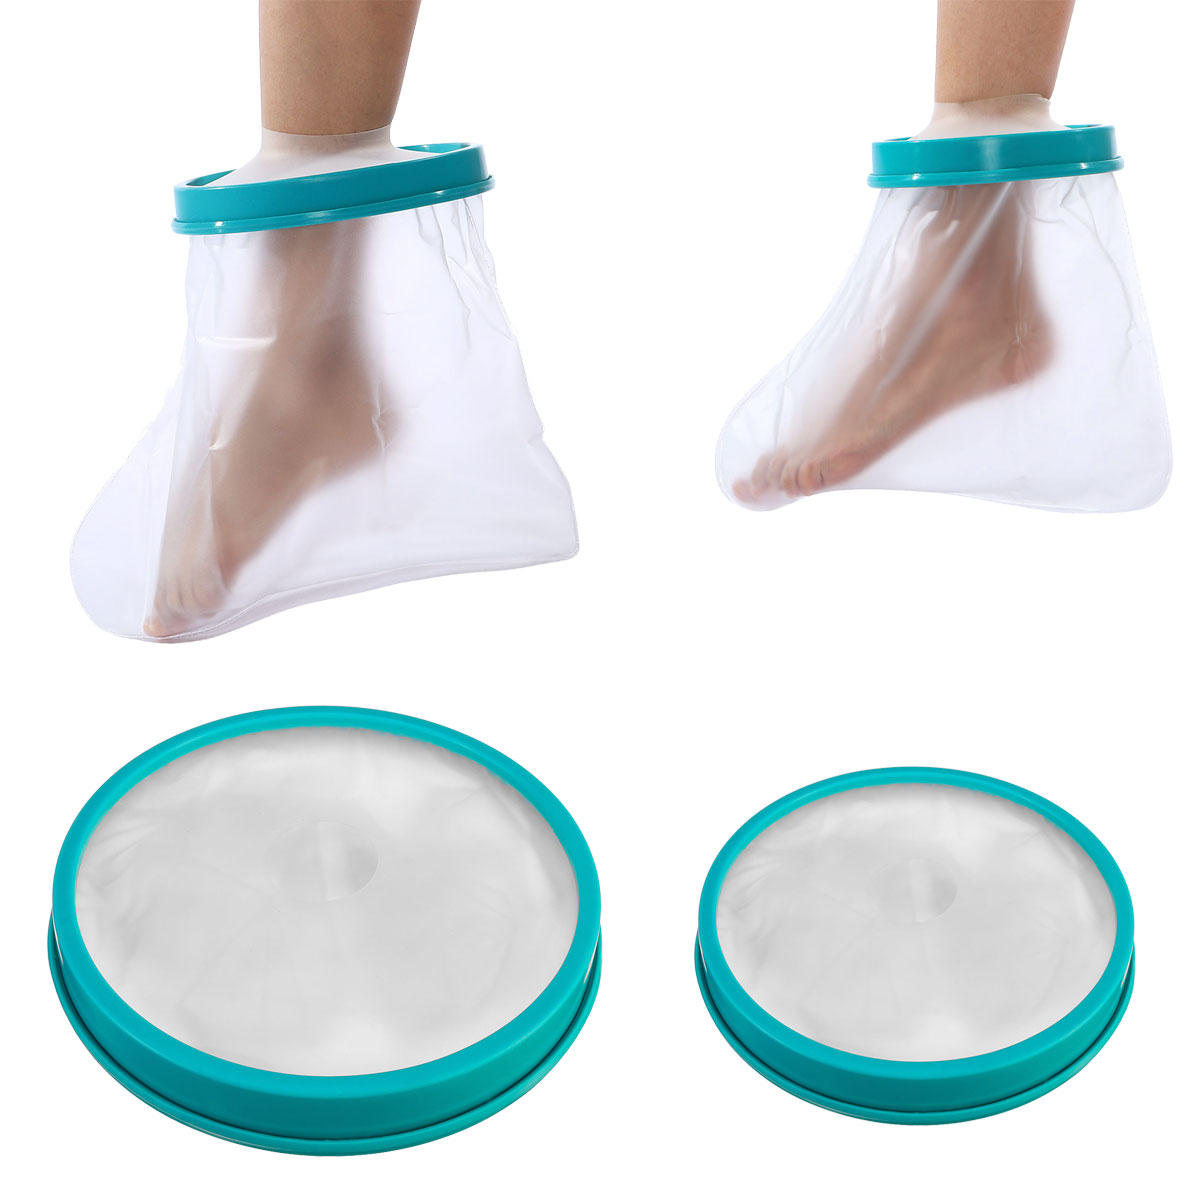 Adult Child Foot Ankle Waterproof Elasticity Seal Cast Plaster Bandage Protector Cover